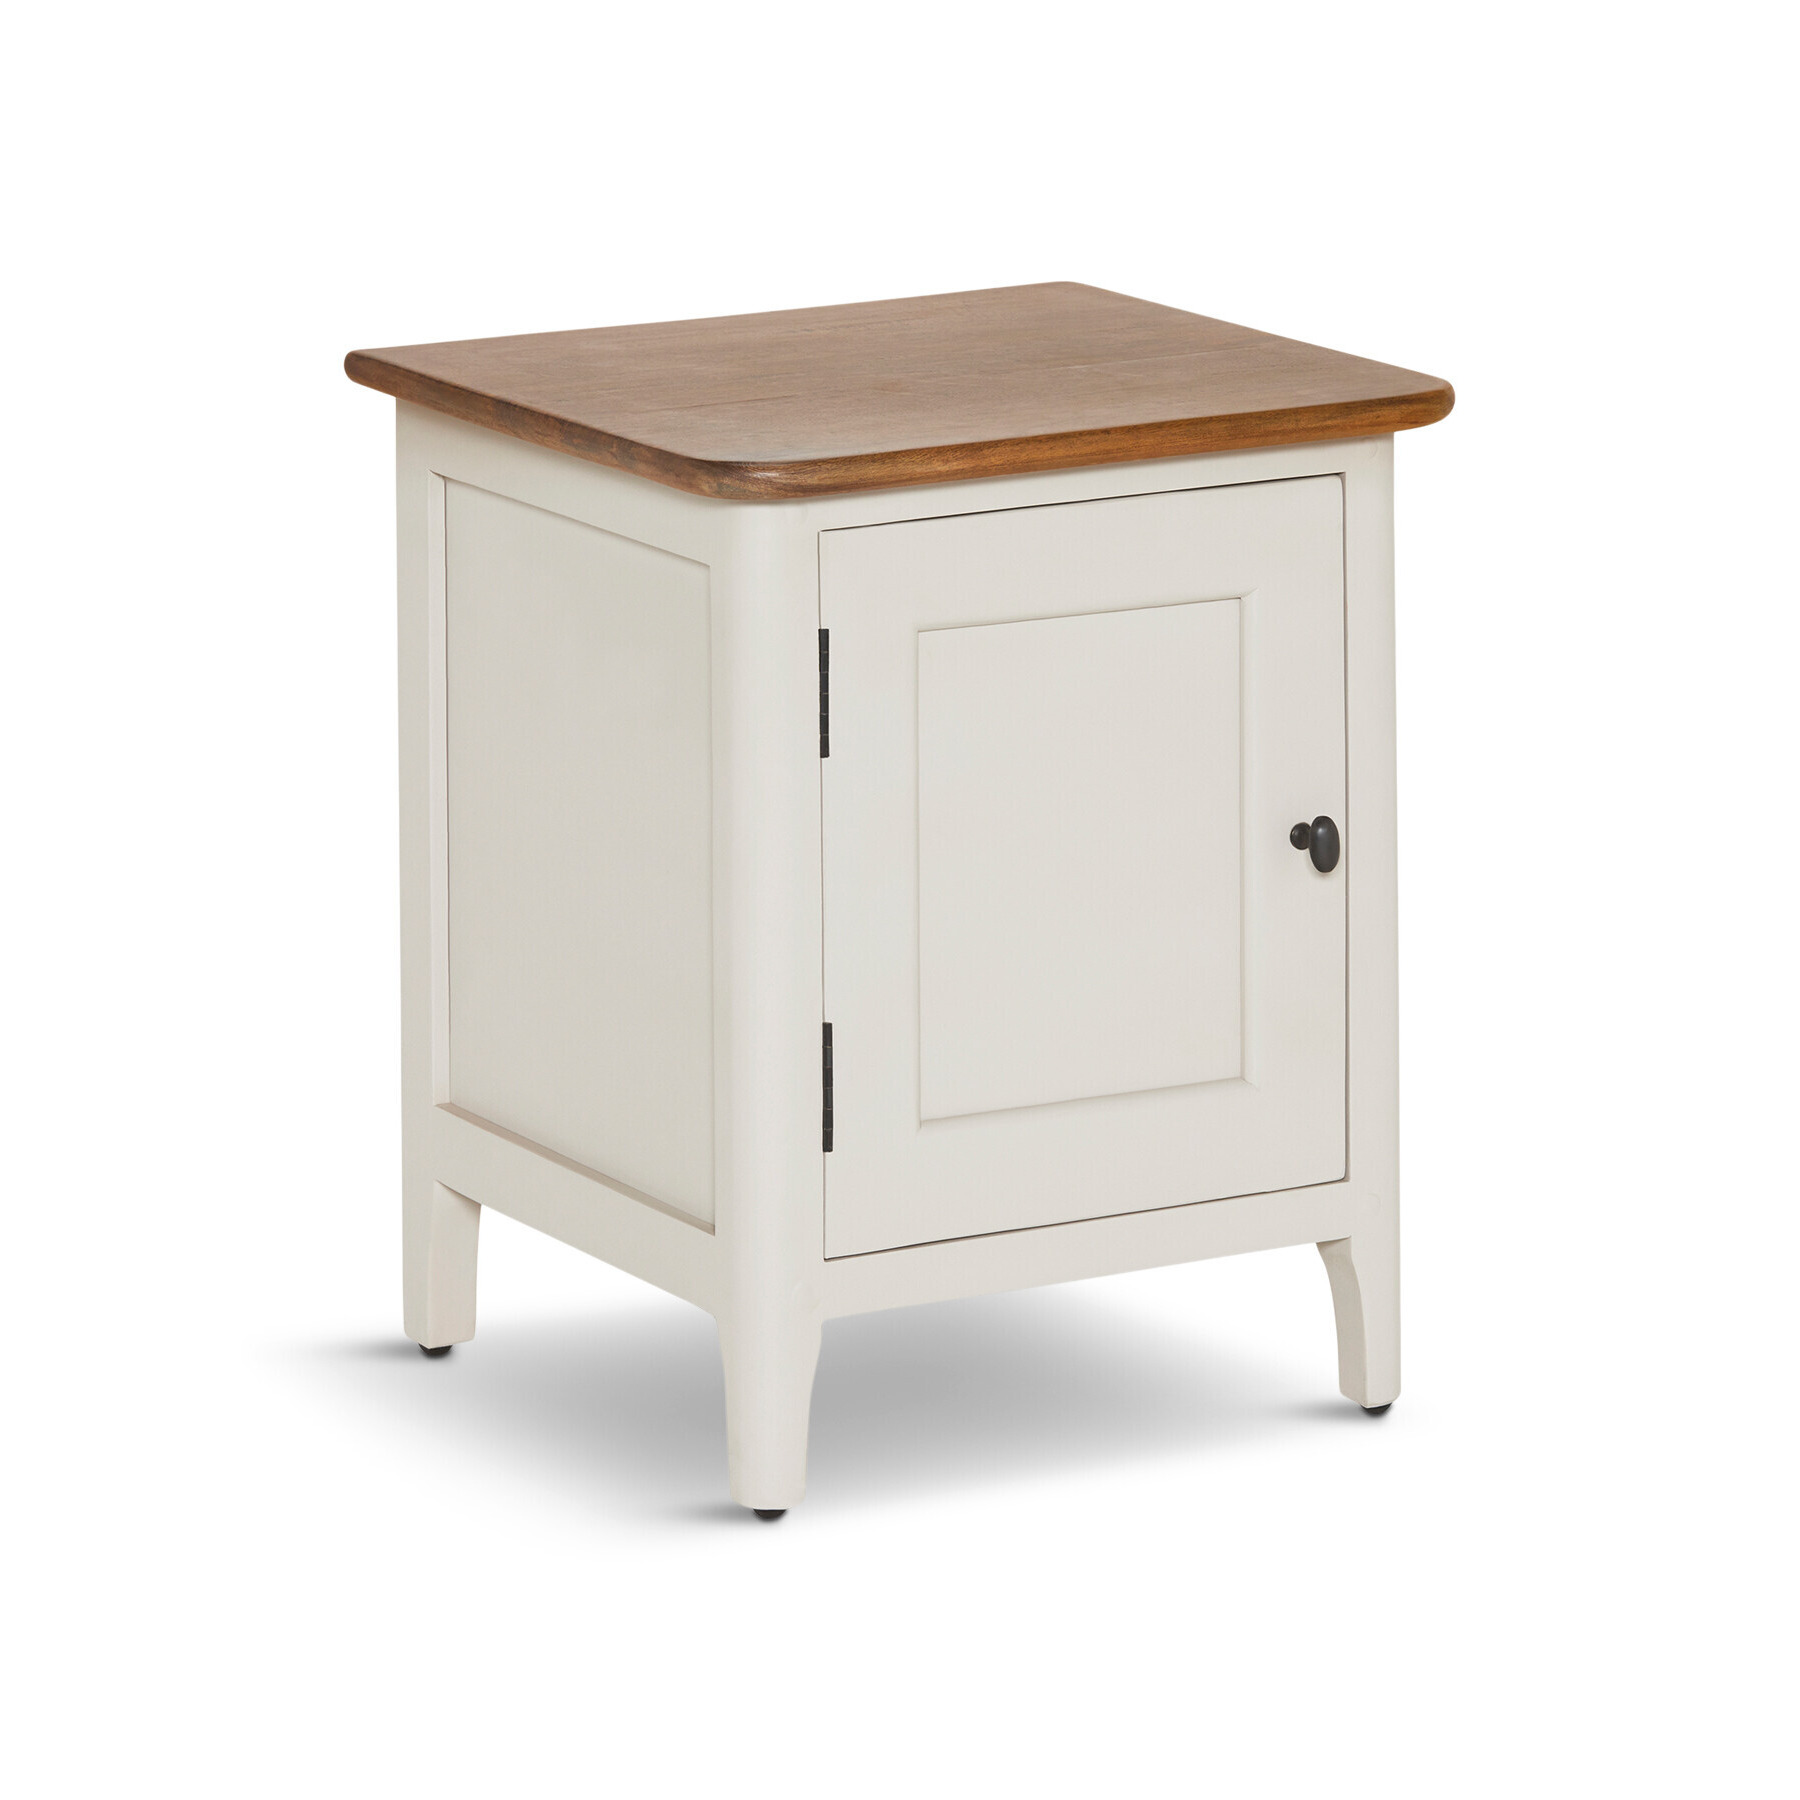 Barker and Stonehouse Mara Right Hand 1 Door Bedside Cabinet White - image 1